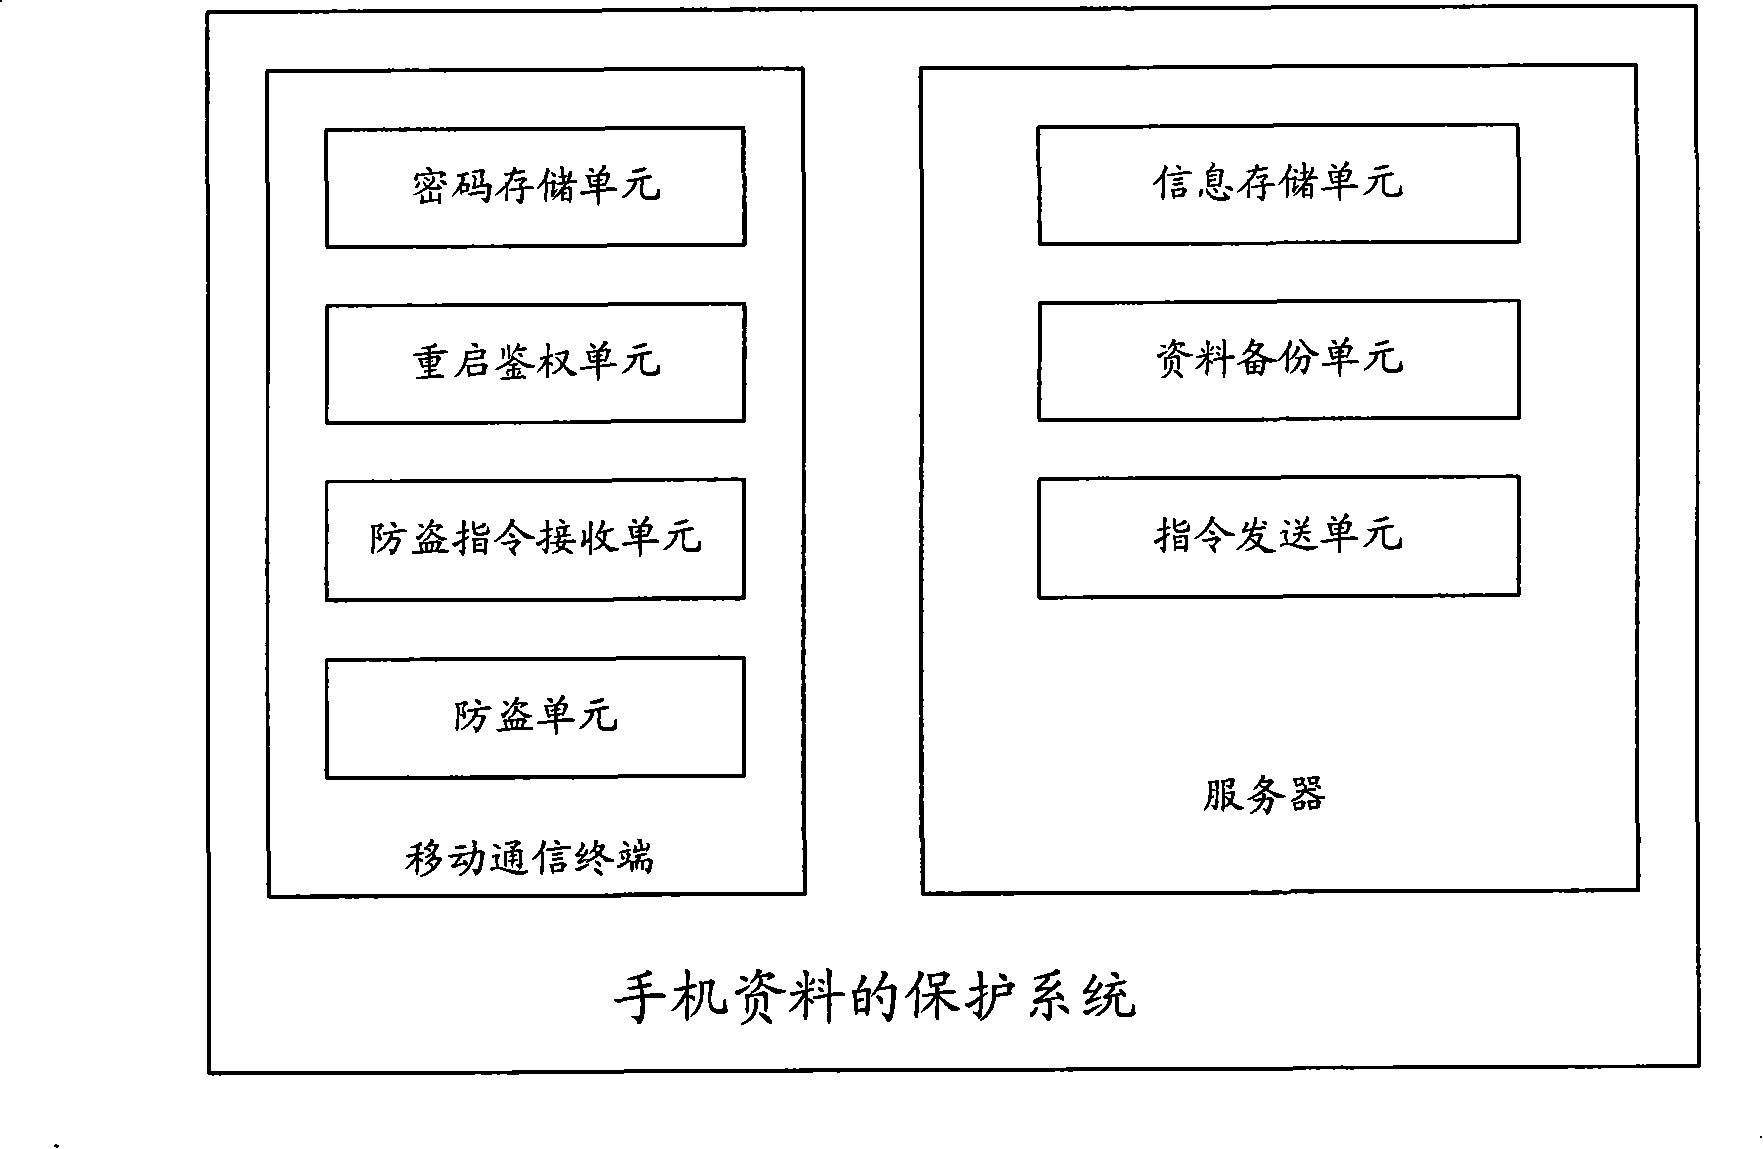 Terminal data protecting method, system as well as mobile communication terminal